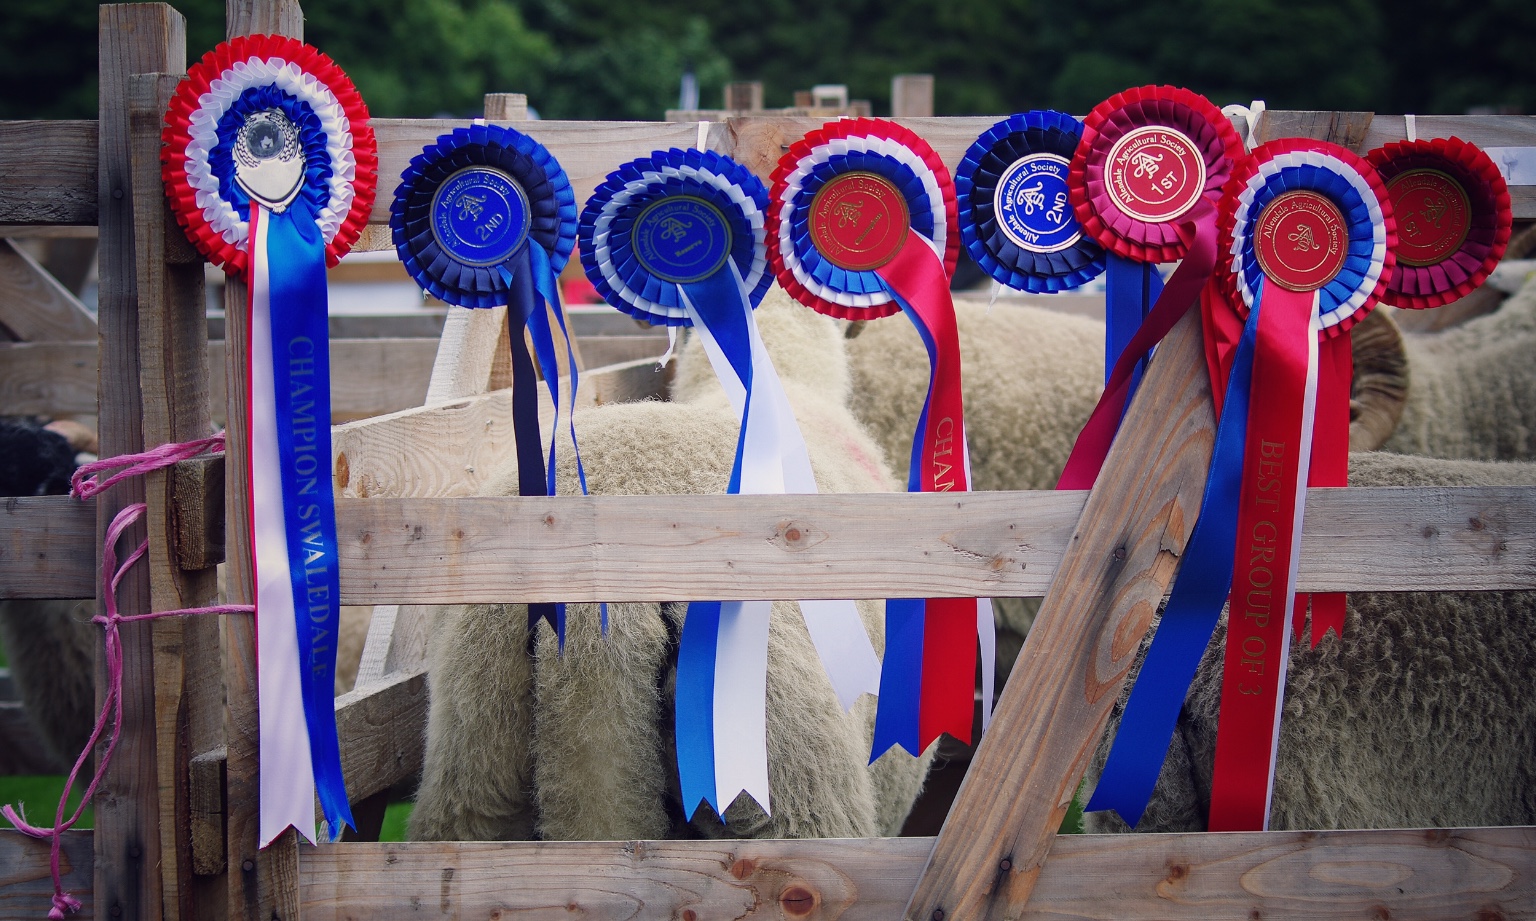 The Allendale Agricultural Show